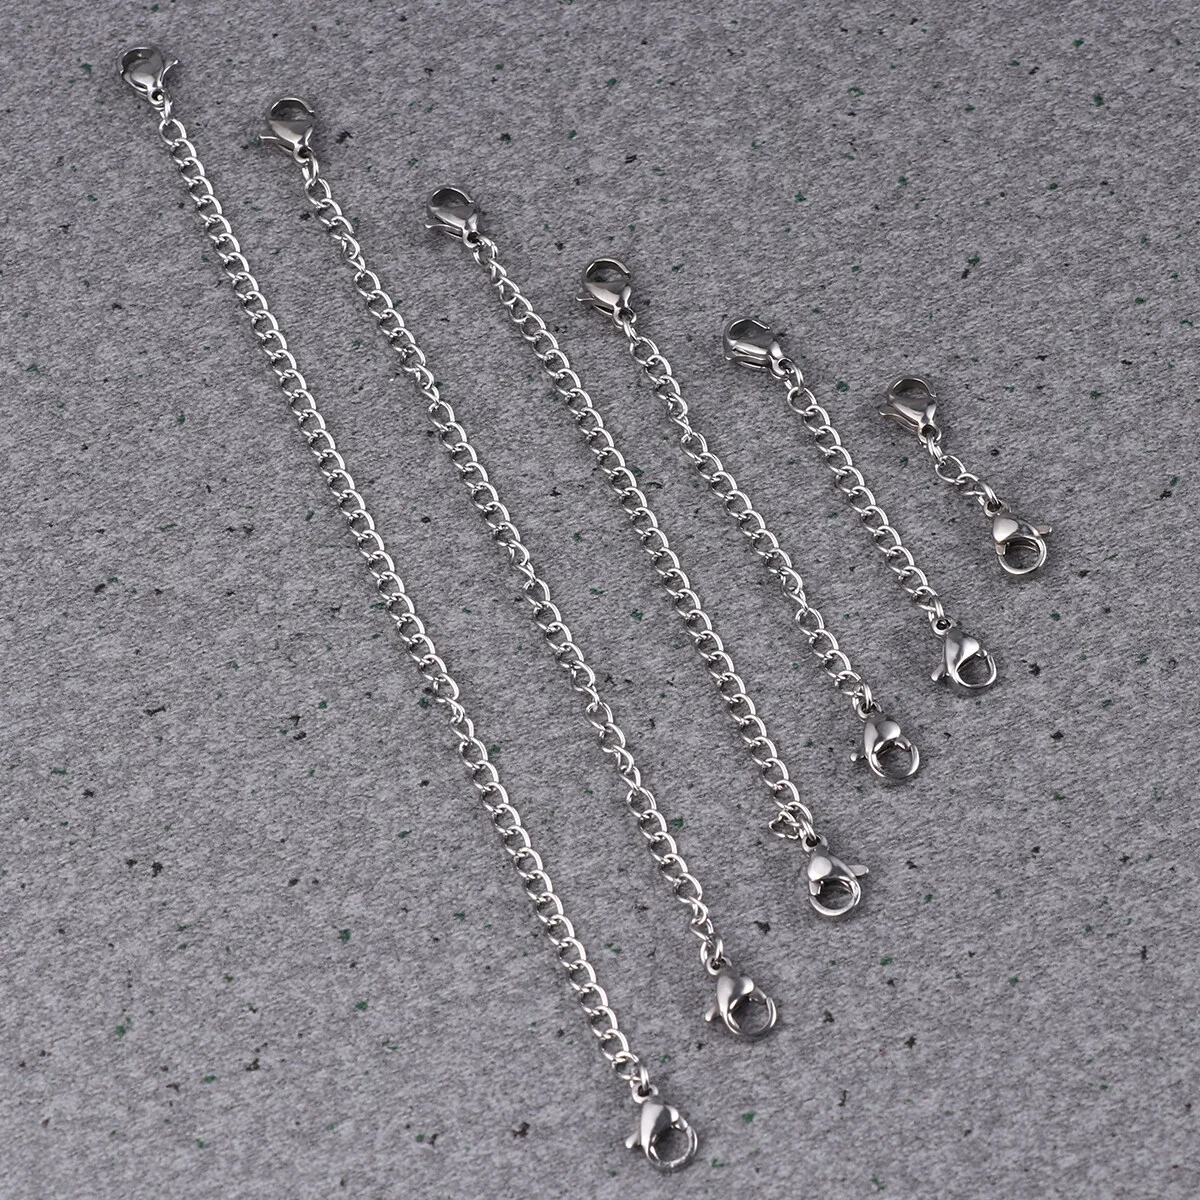 

Necklace Extender, 6pcs Stainless Steel Necklace Bracelet Anklet Extension Chains with Lobster Clasps DIY Craft Jewelry Making